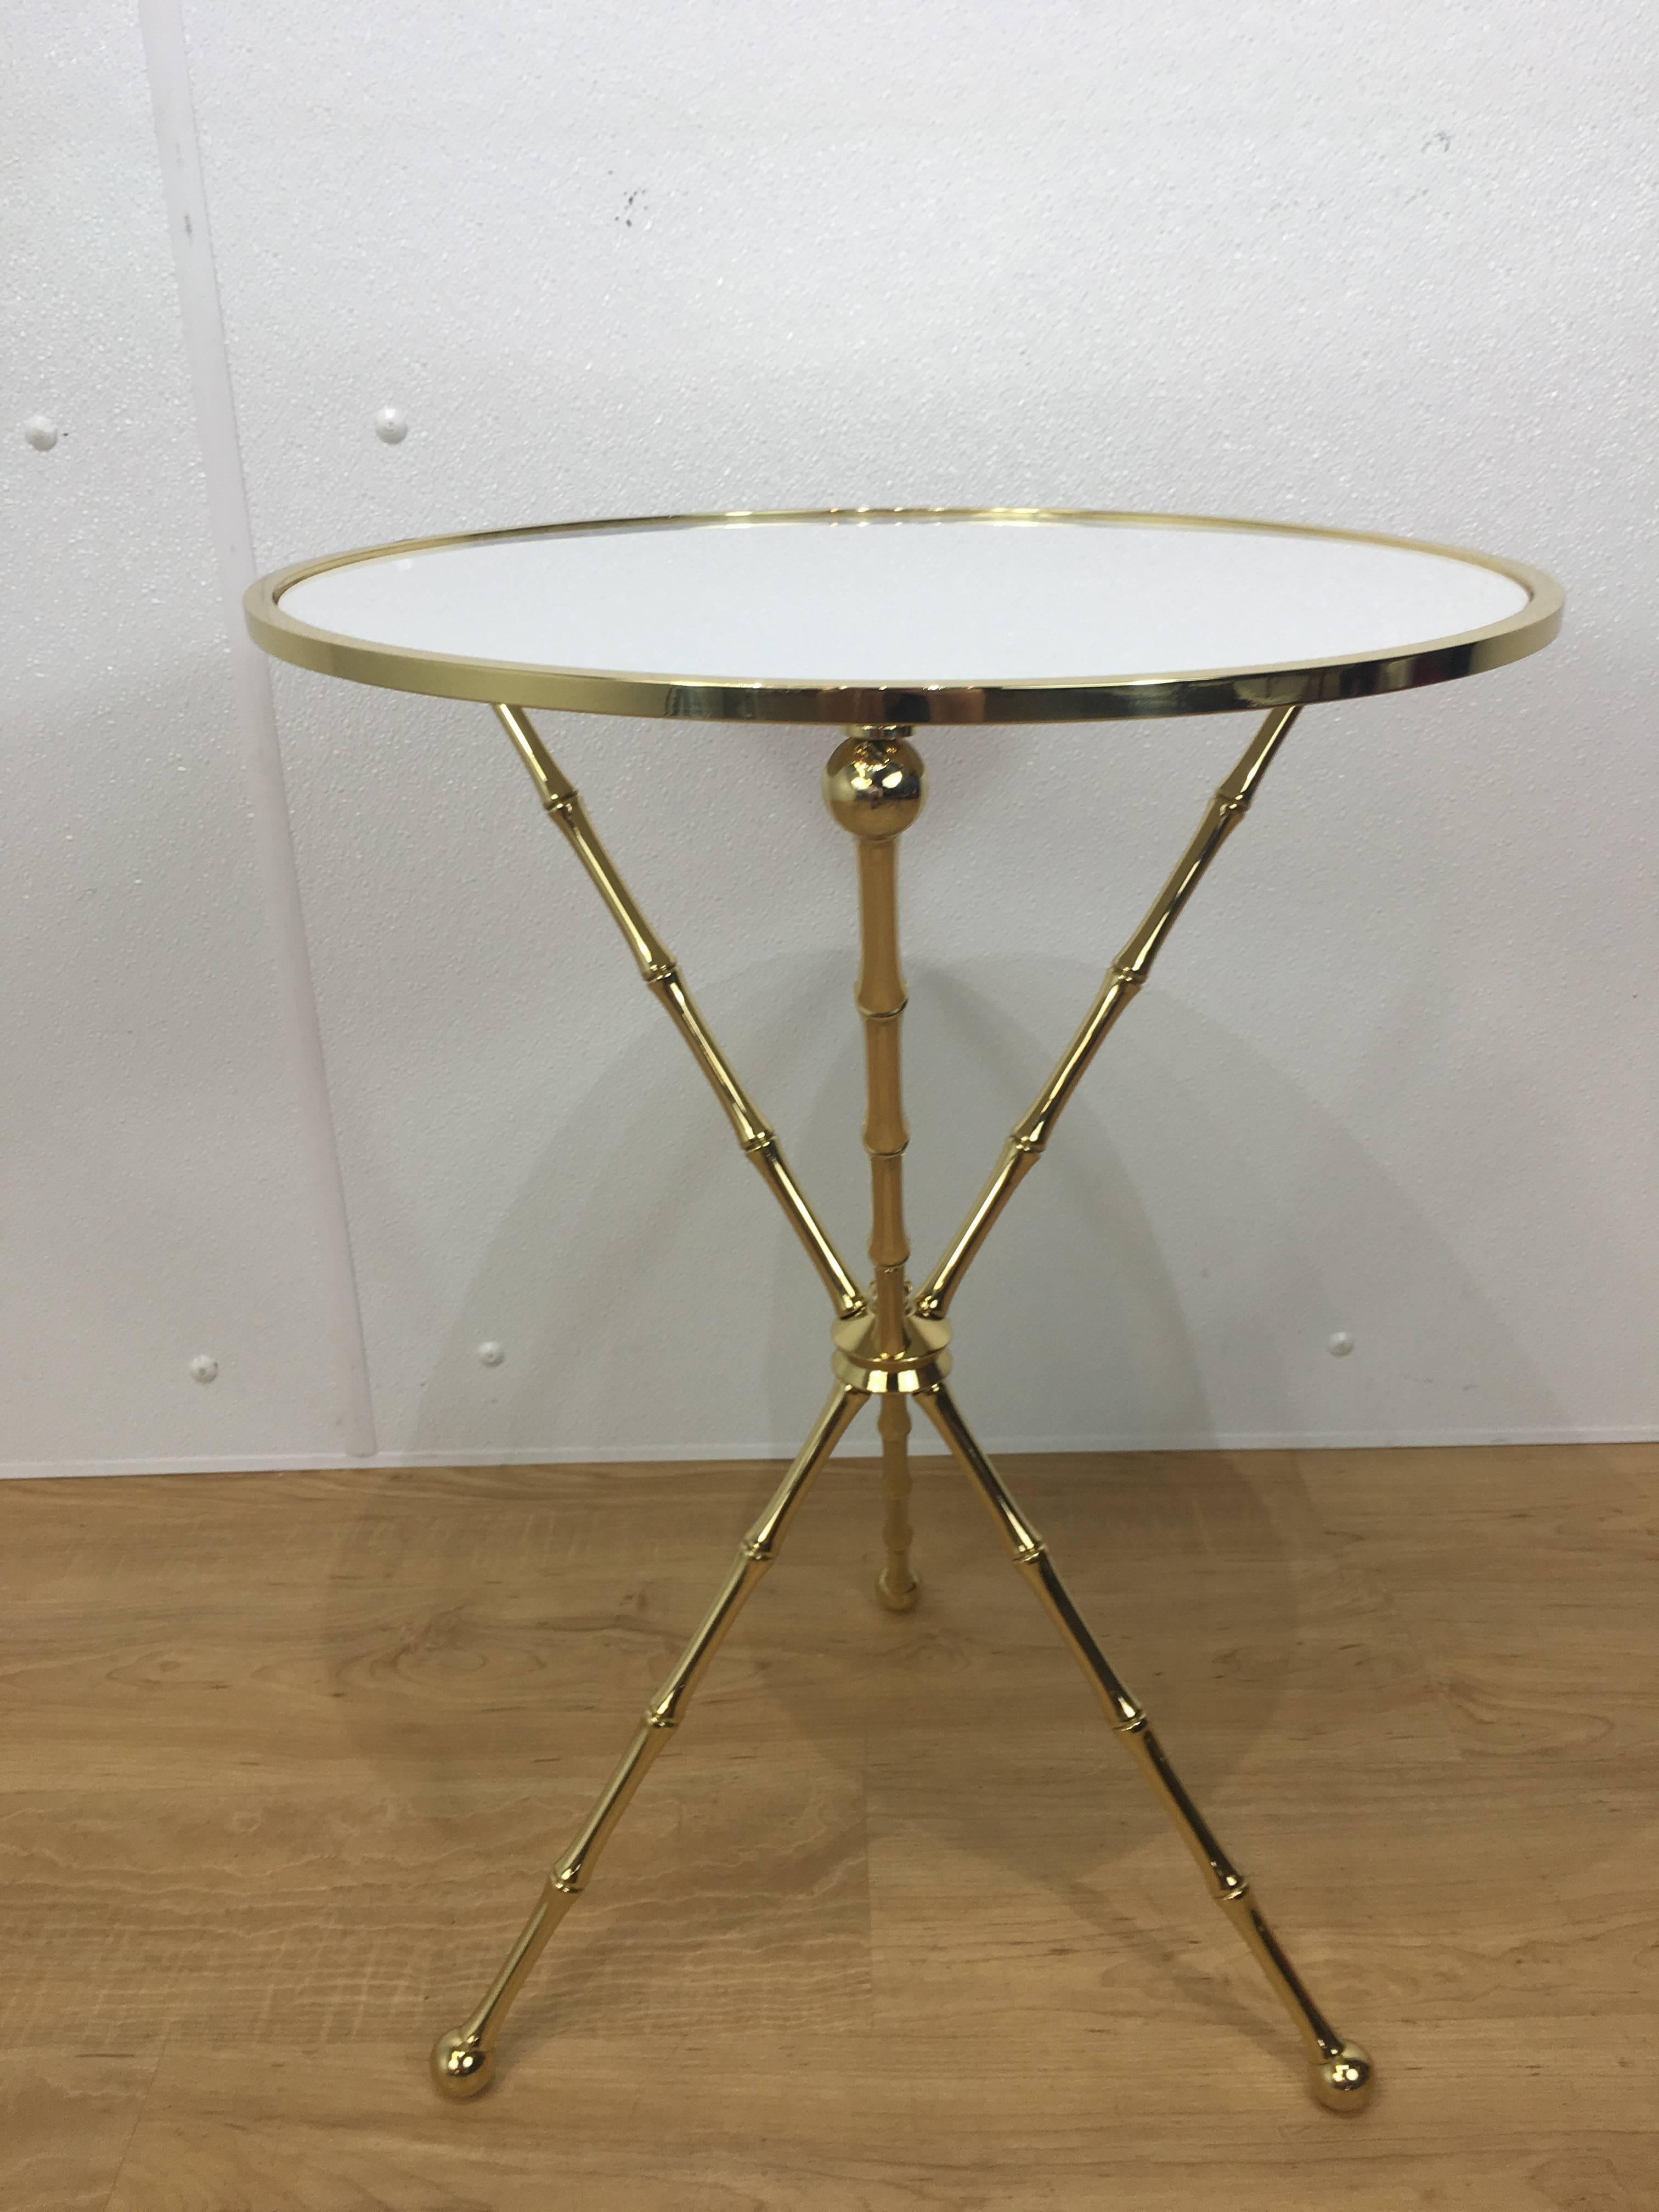 Maison Baguès bamboo motif table, of large-scale the circular top with inset white glass top, raised on bamboo motif tripod base, professionally polished.